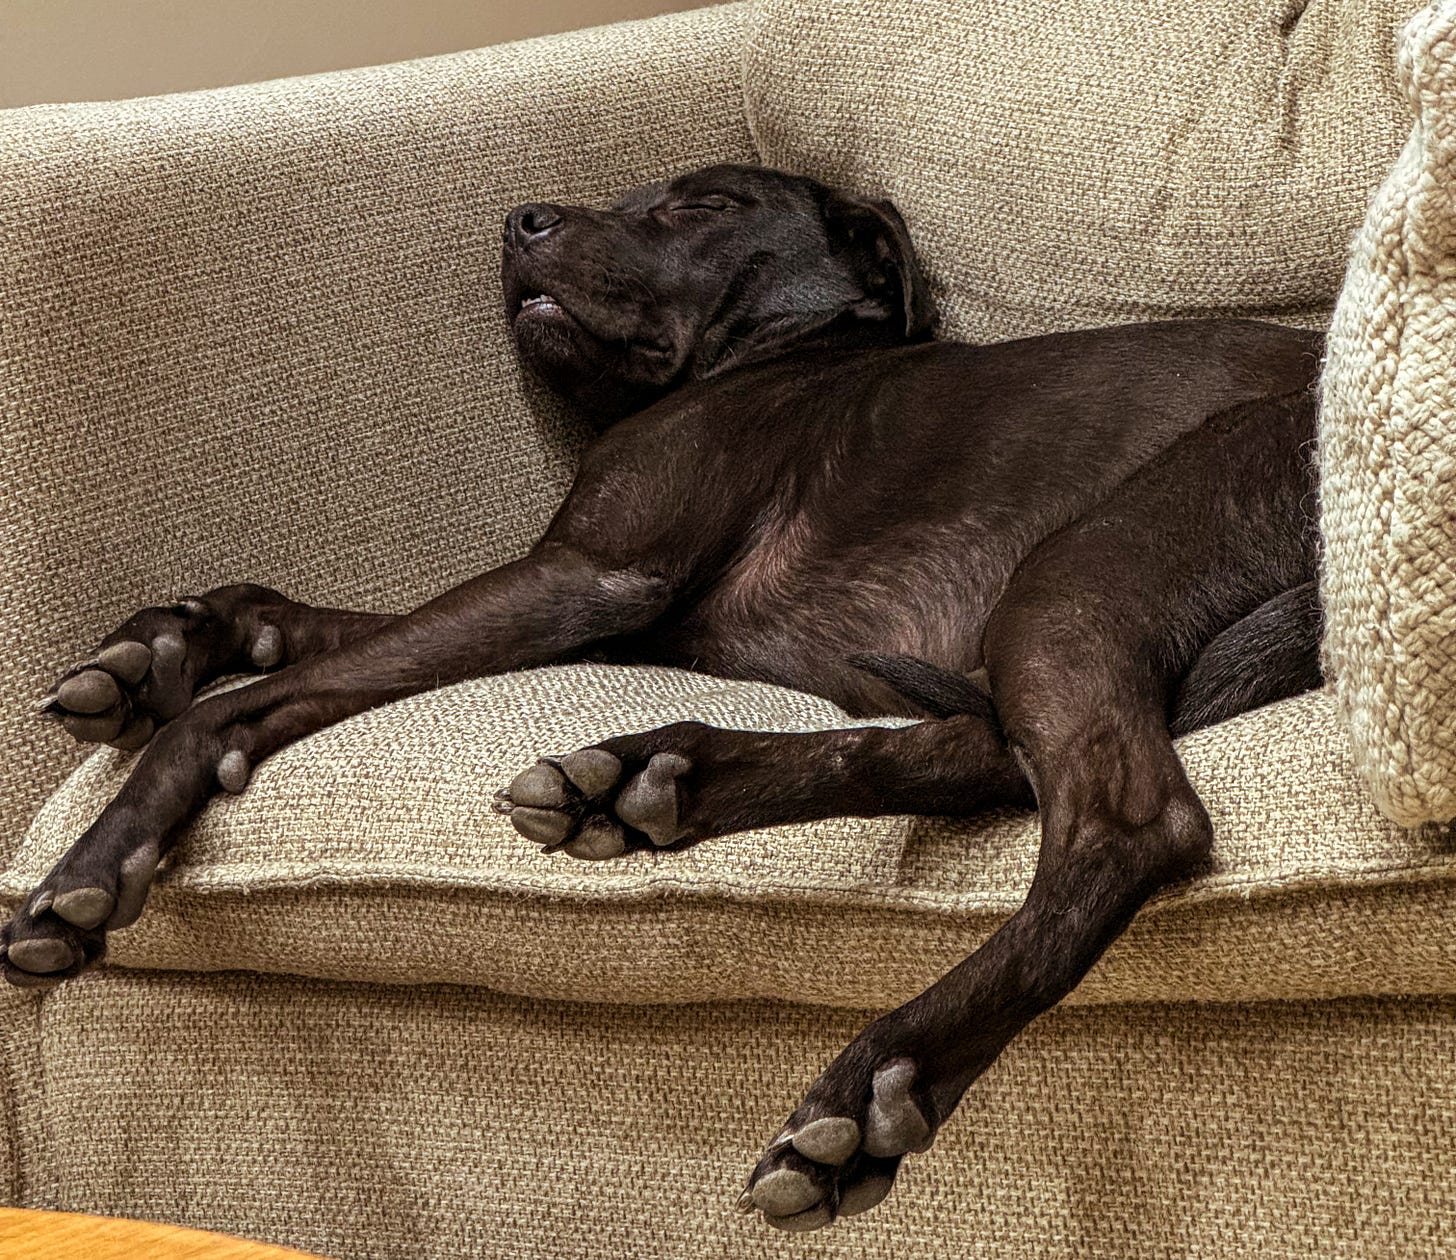 A black dog sleeps with her mouth open sitting upright on a brown couch. It does not look comfortable.